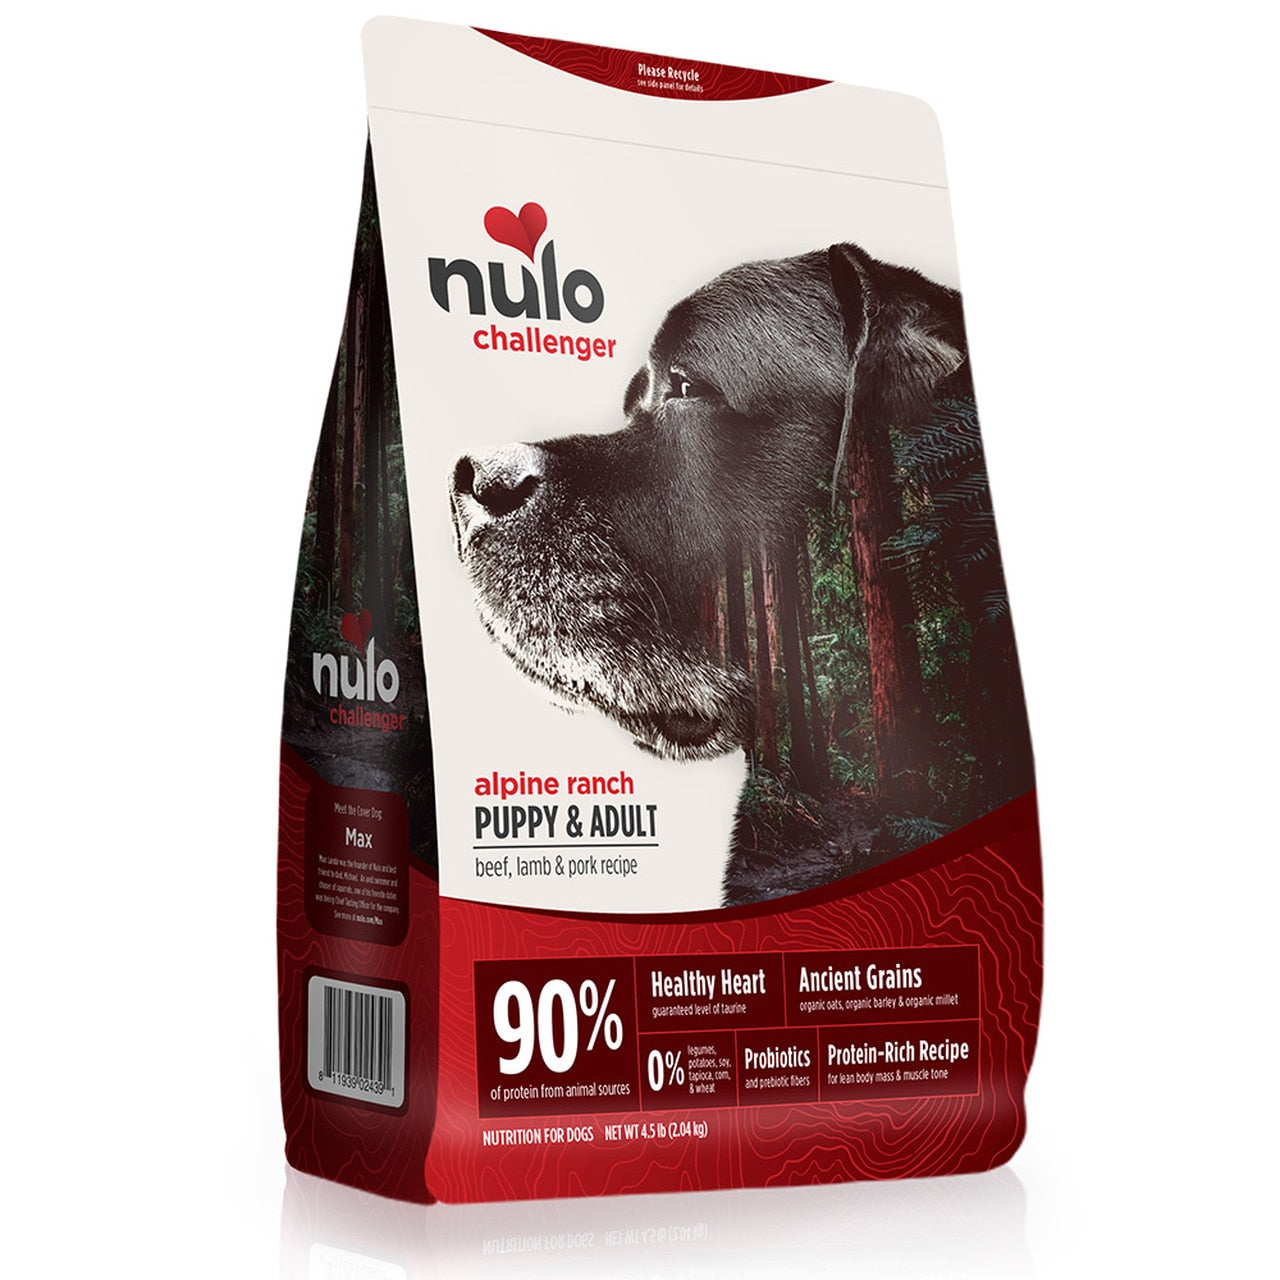 Nulo Challenger Alpine Ranch Beef, Lamb & Pork Puppy & Adult Dry Dog Food, 24-lb (Size: 24-lb)